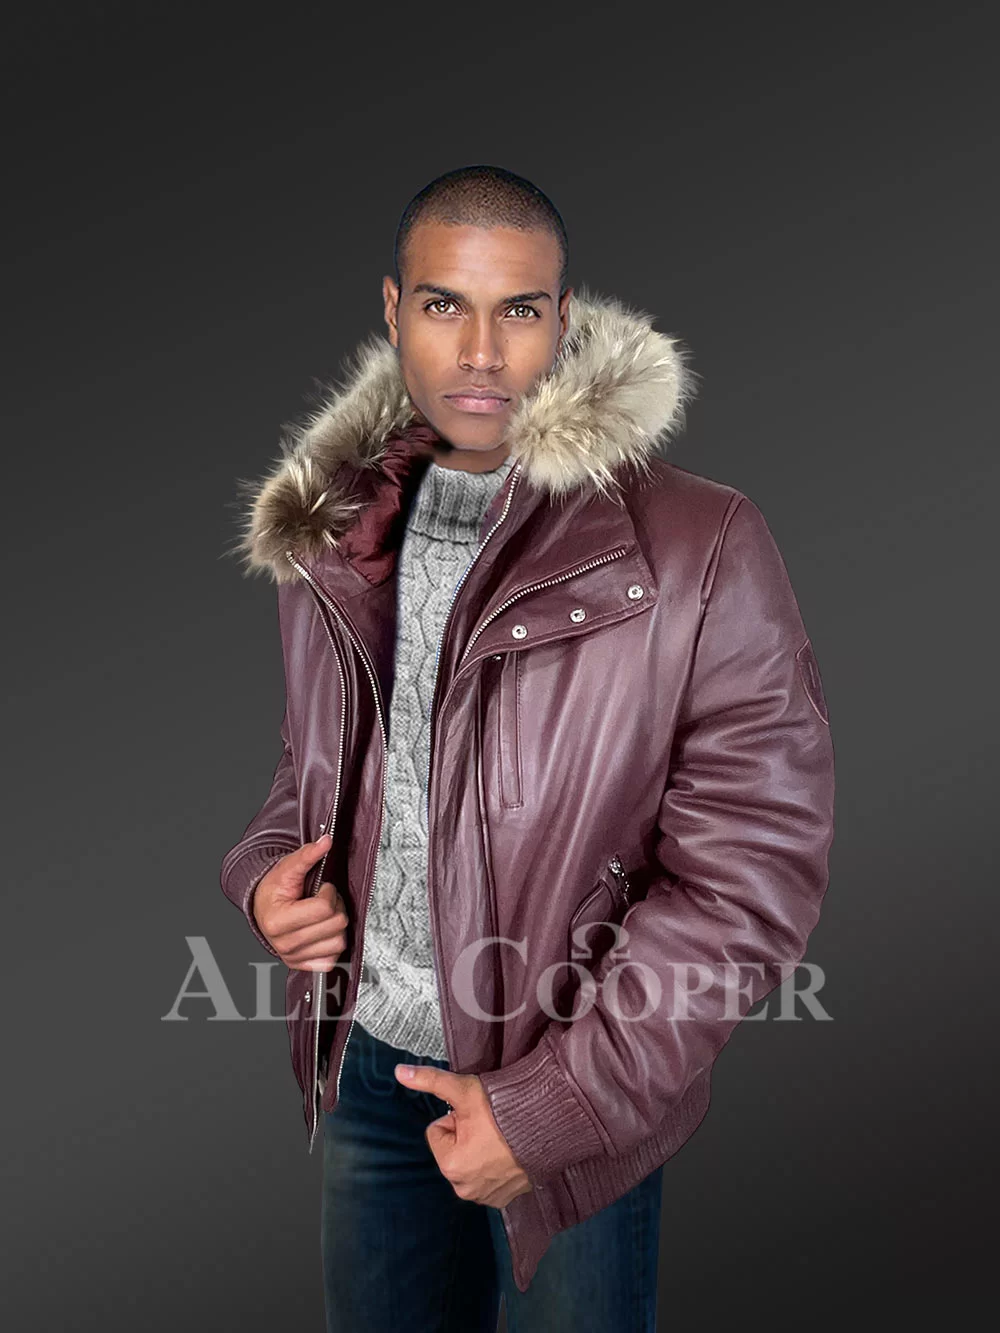 Men's Brown Leather Bomber Jacket with Hood